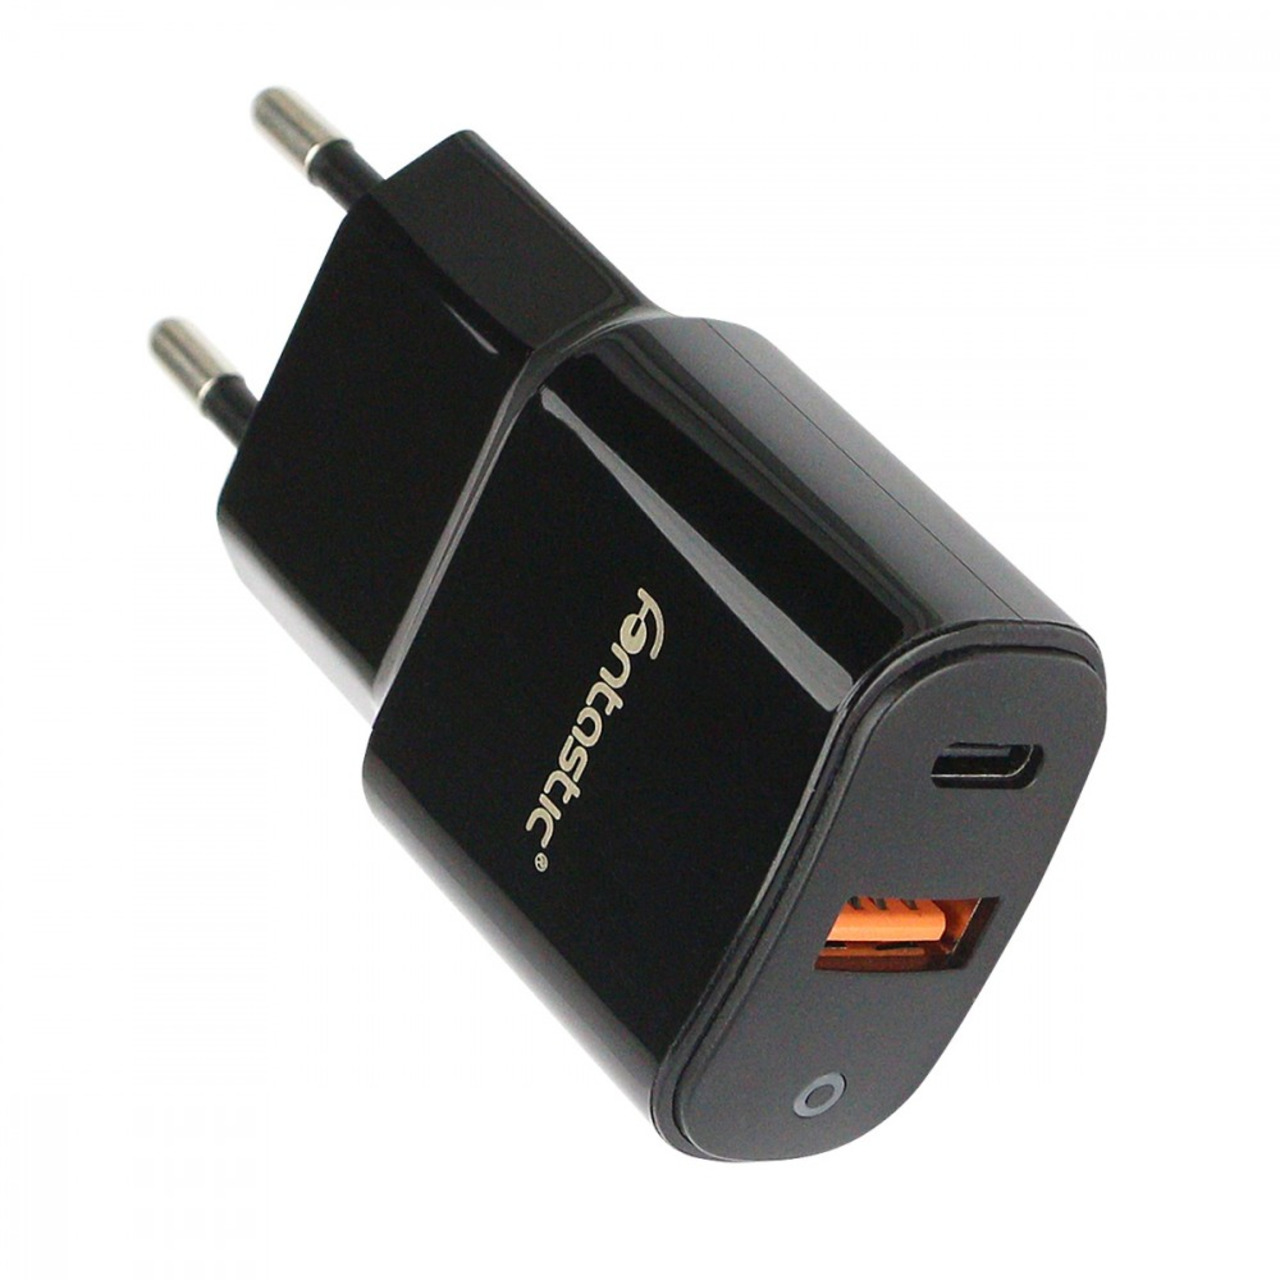 Fontastic USB-Type-C PD + USB-A Ladegert Fort- 18 W- Power Delivery- 100 - 240 V- Schwarz